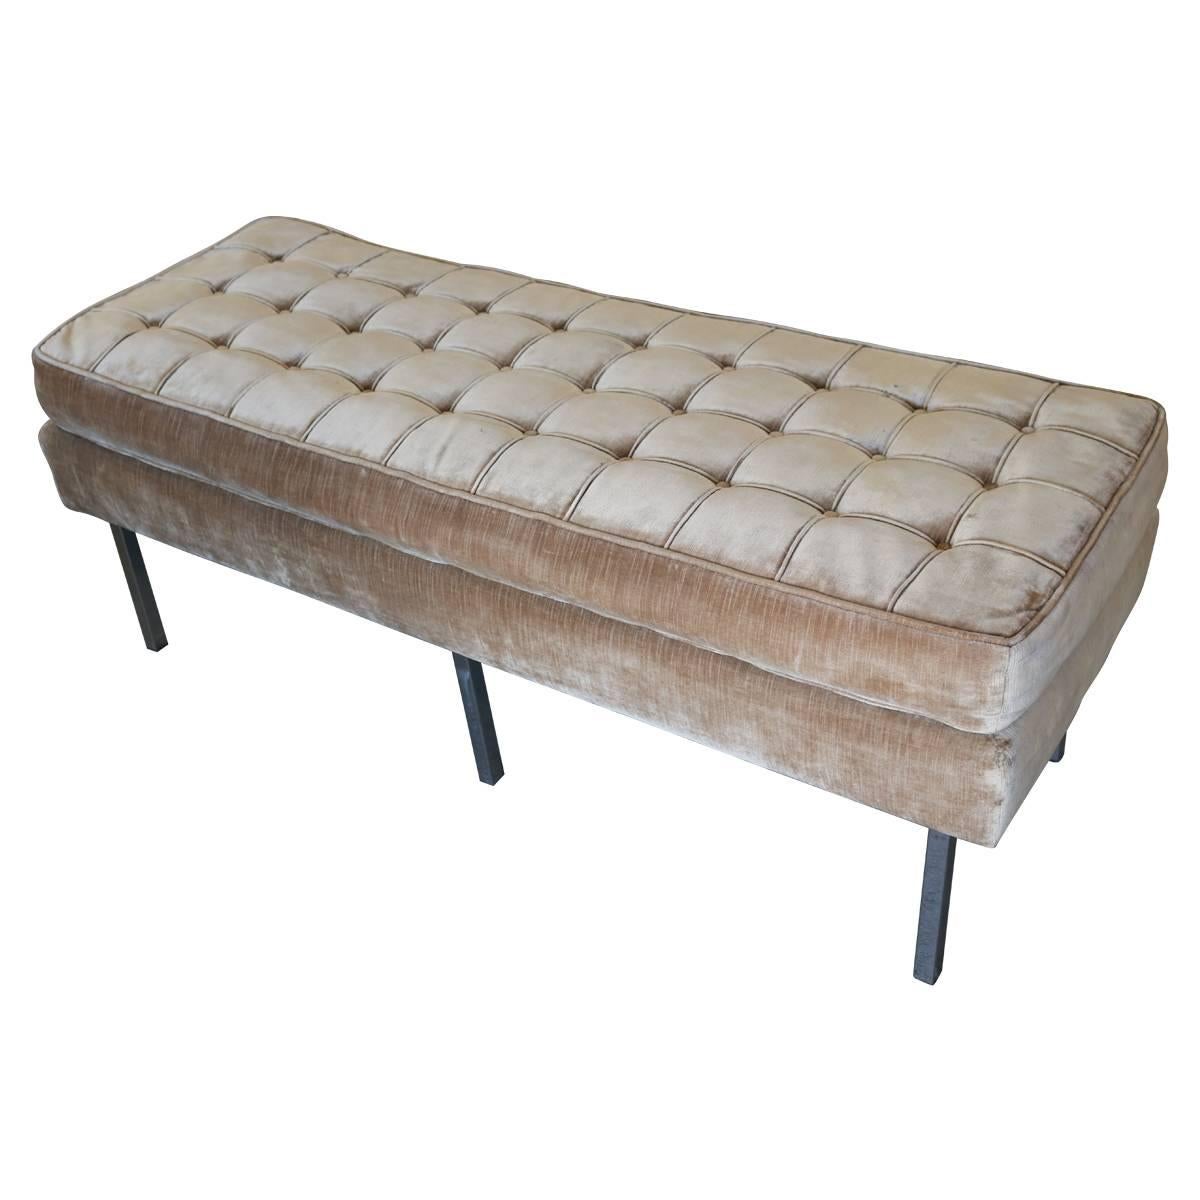 Tufted Velvet Bench Seating with Chrome Legs Attributed to Milo Baughman